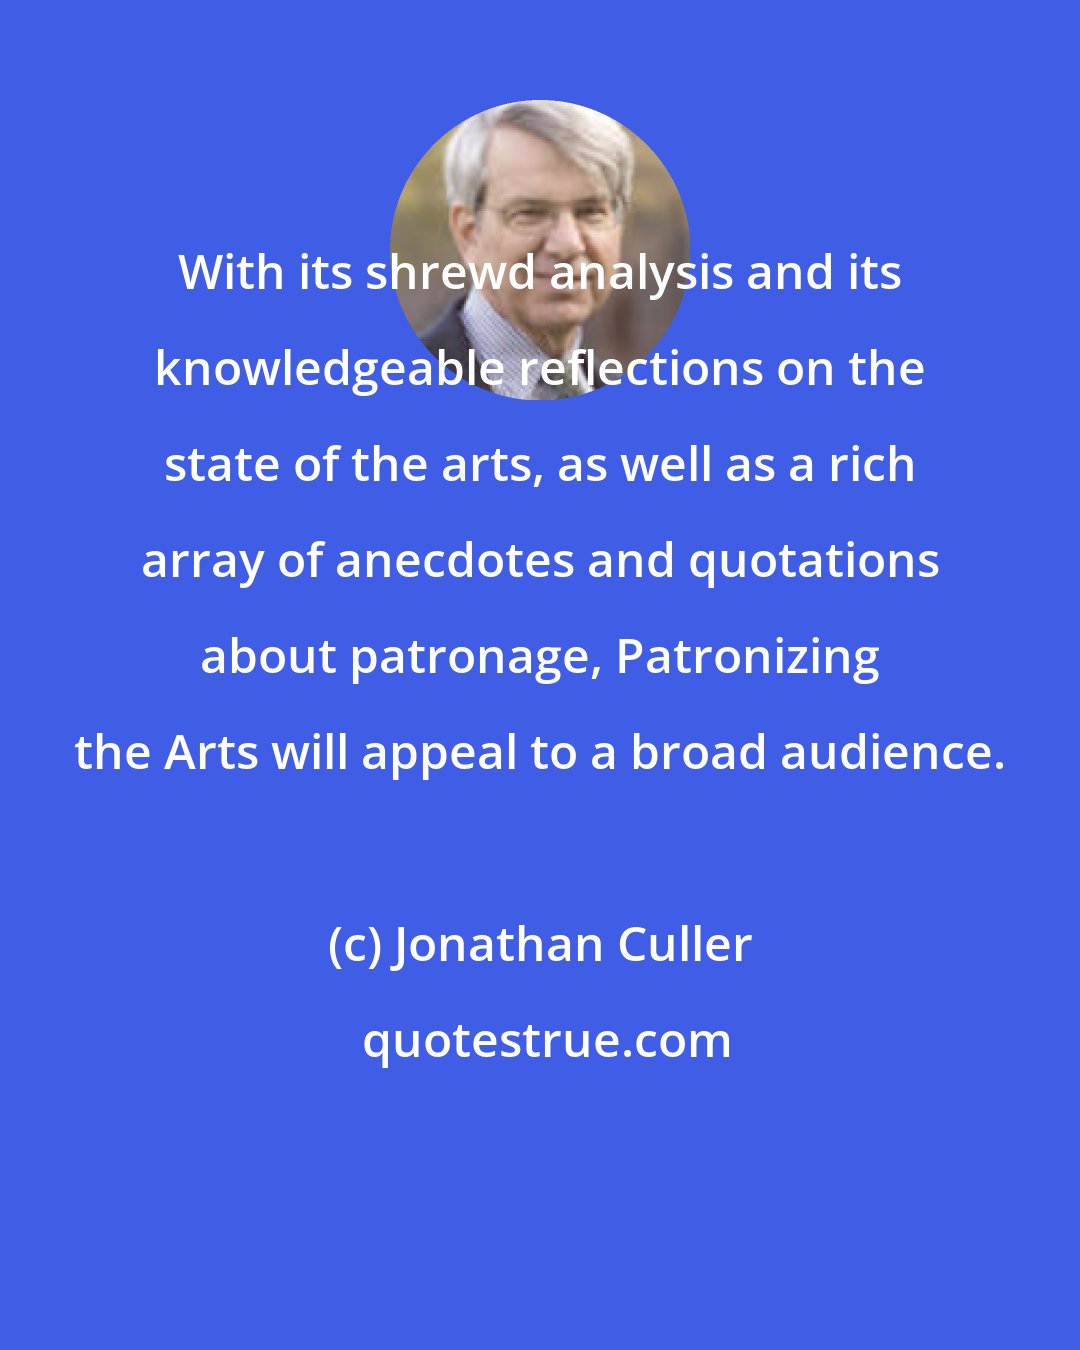 Jonathan Culler: With its shrewd analysis and its knowledgeable reflections on the state of the arts, as well as a rich array of anecdotes and quotations about patronage, Patronizing the Arts will appeal to a broad audience.